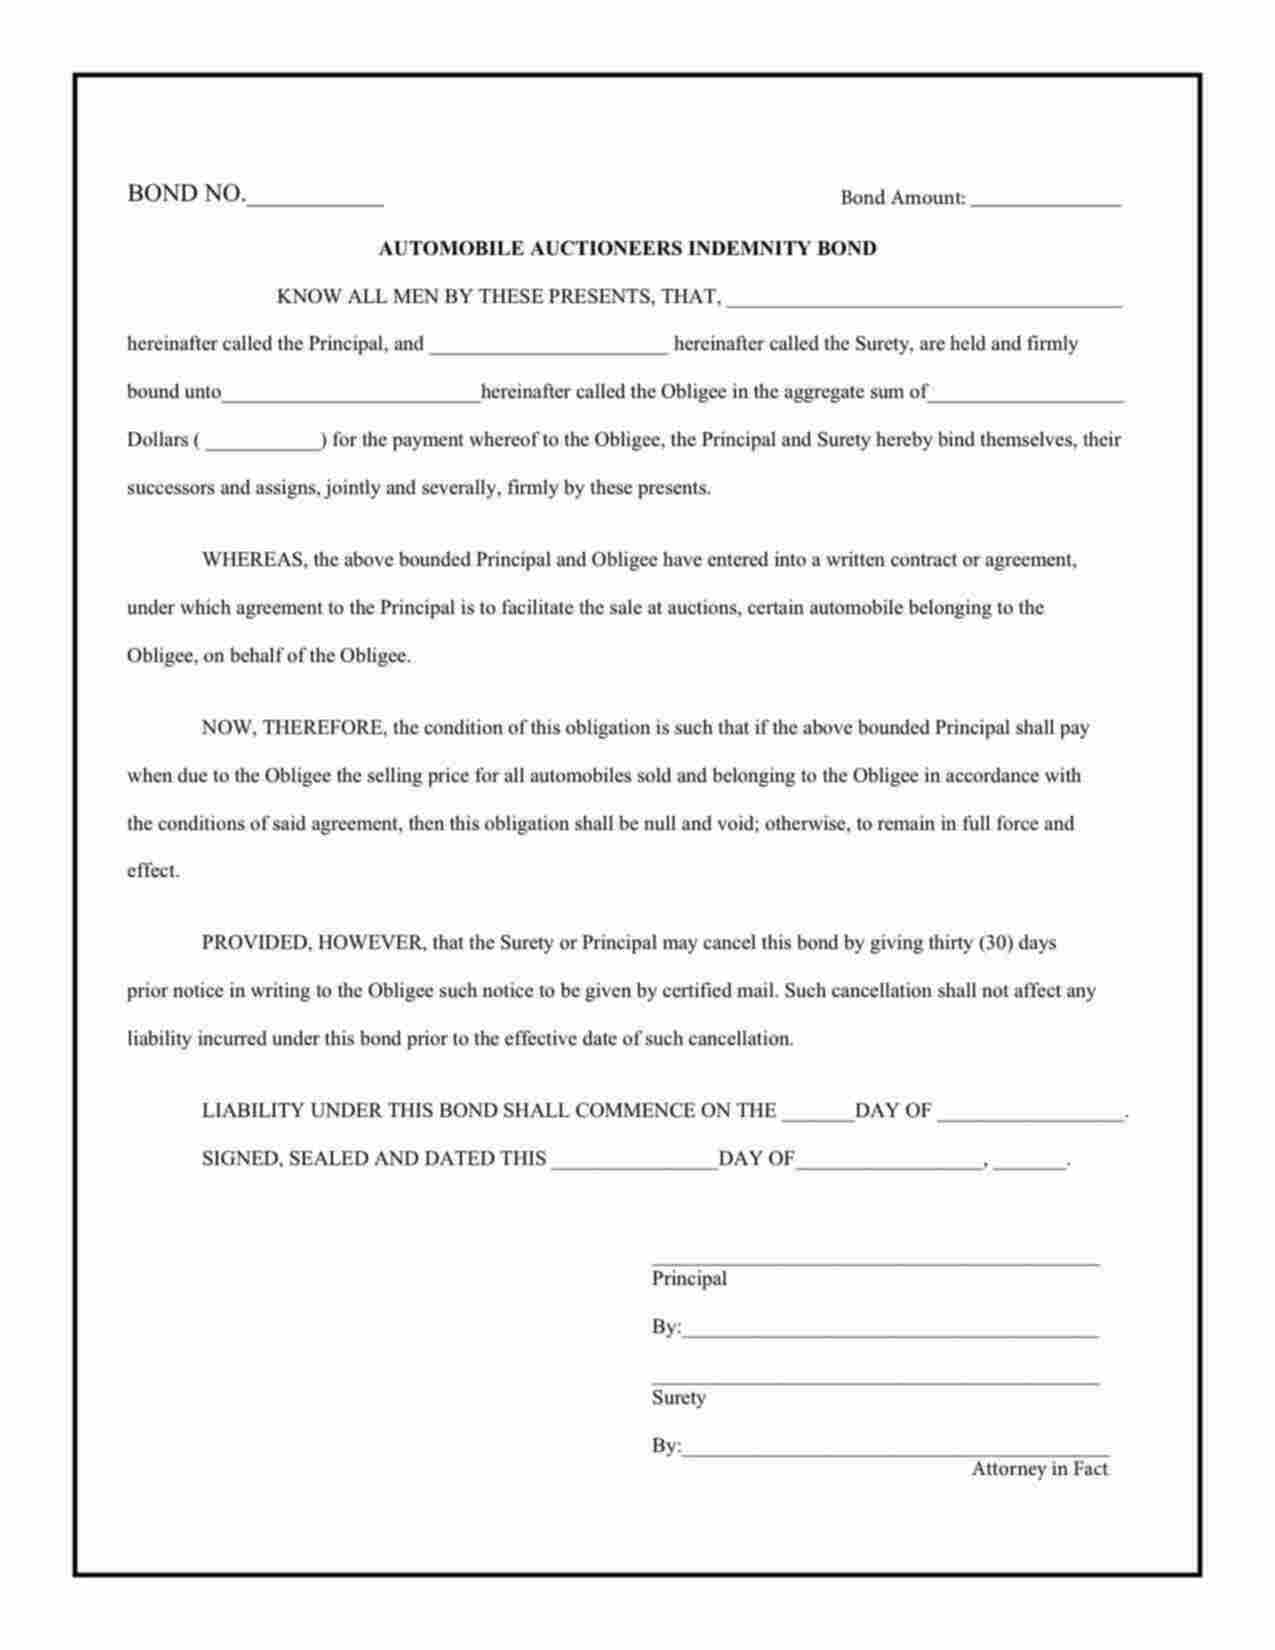 Texas Automobile Auctioneers Indemnity Bond Form